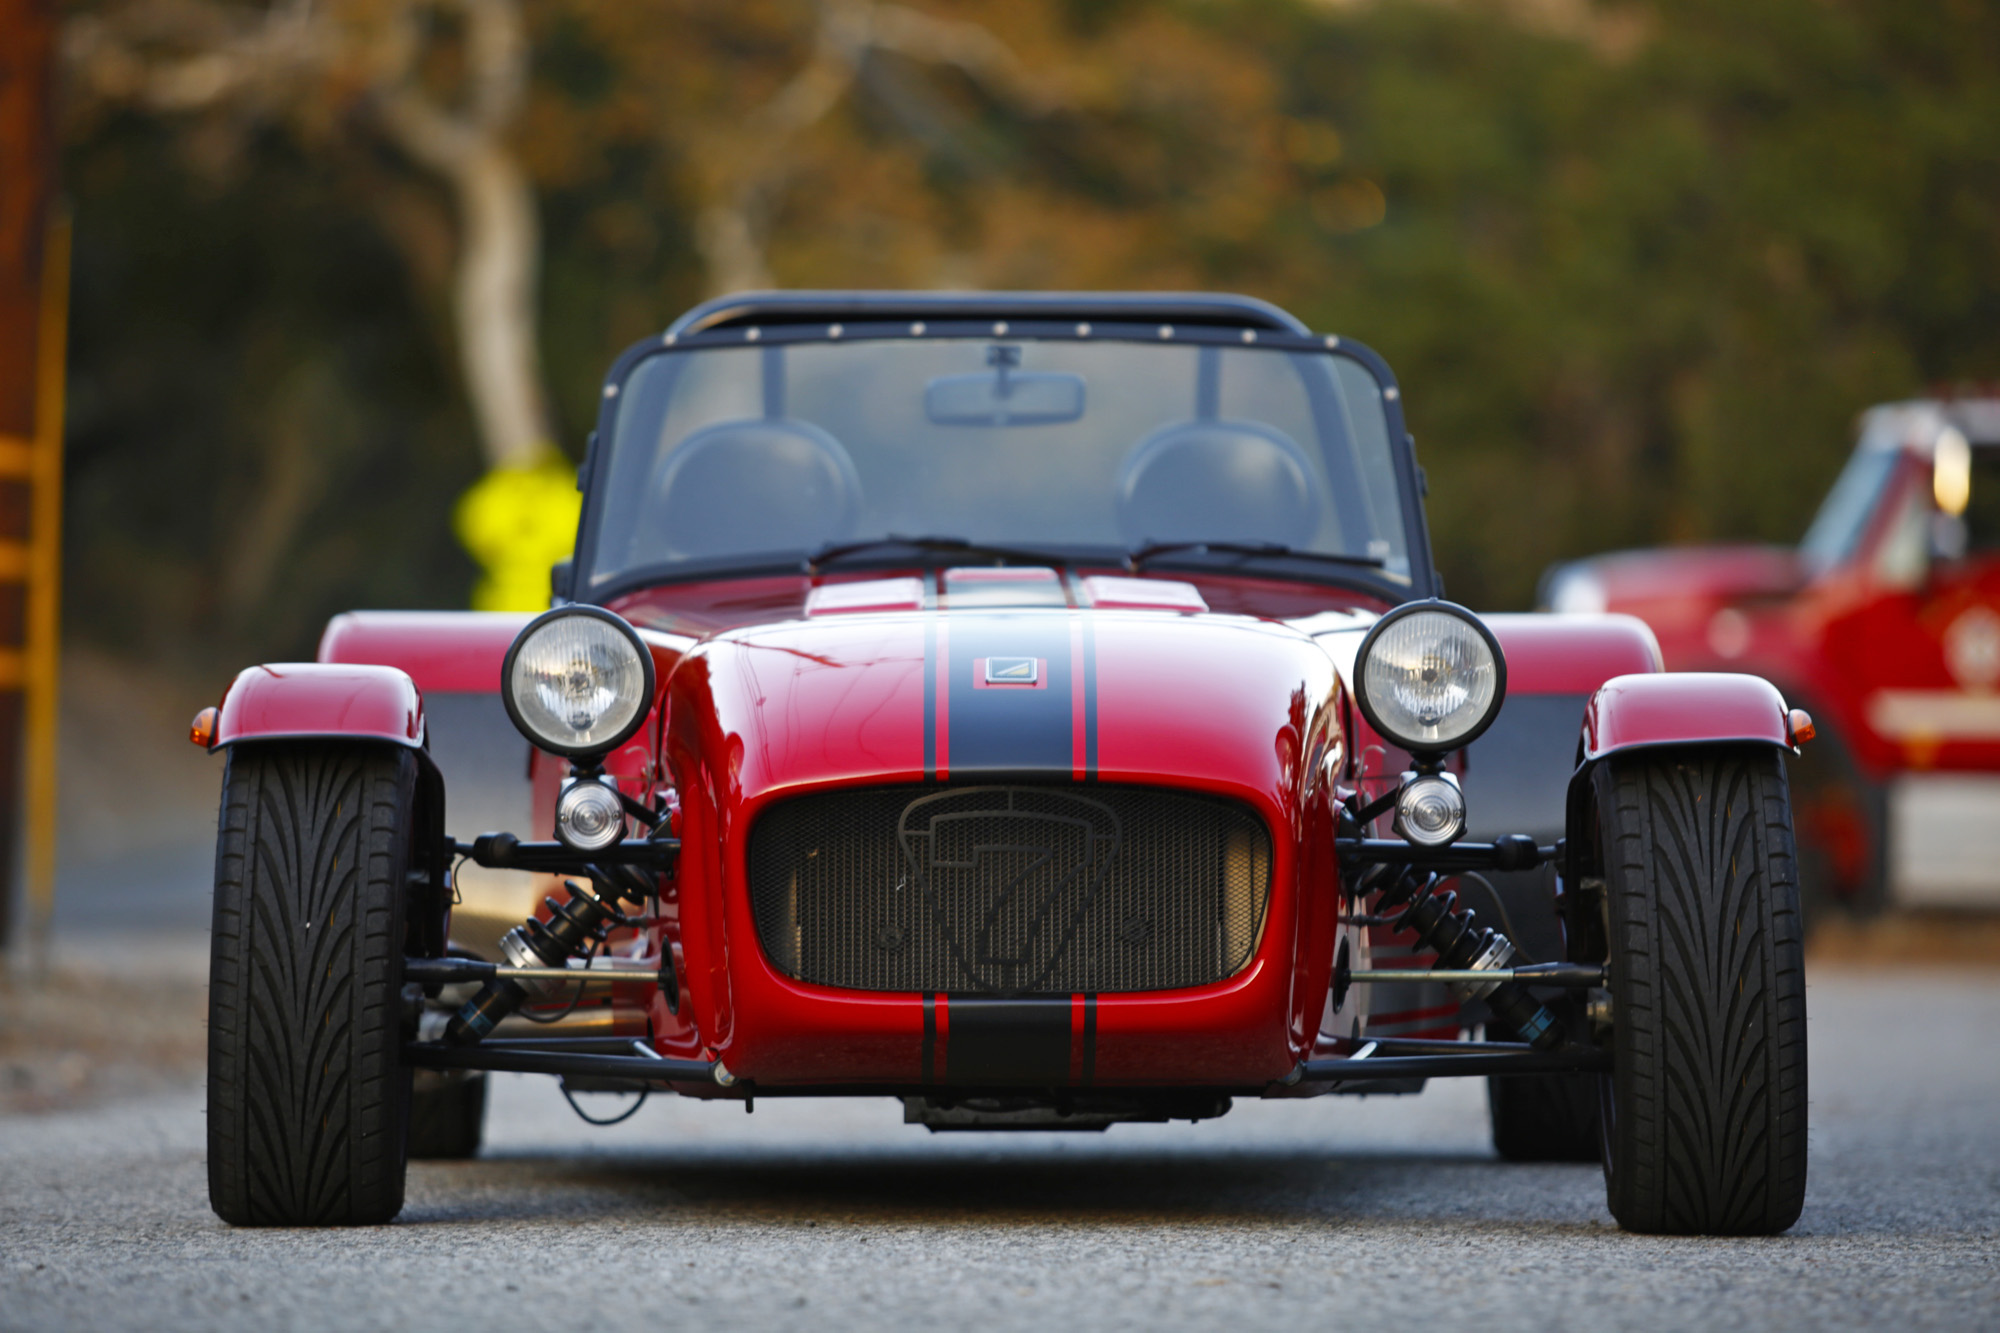 The Caterham Seven 360 Is My Personal Best Driver’s Car